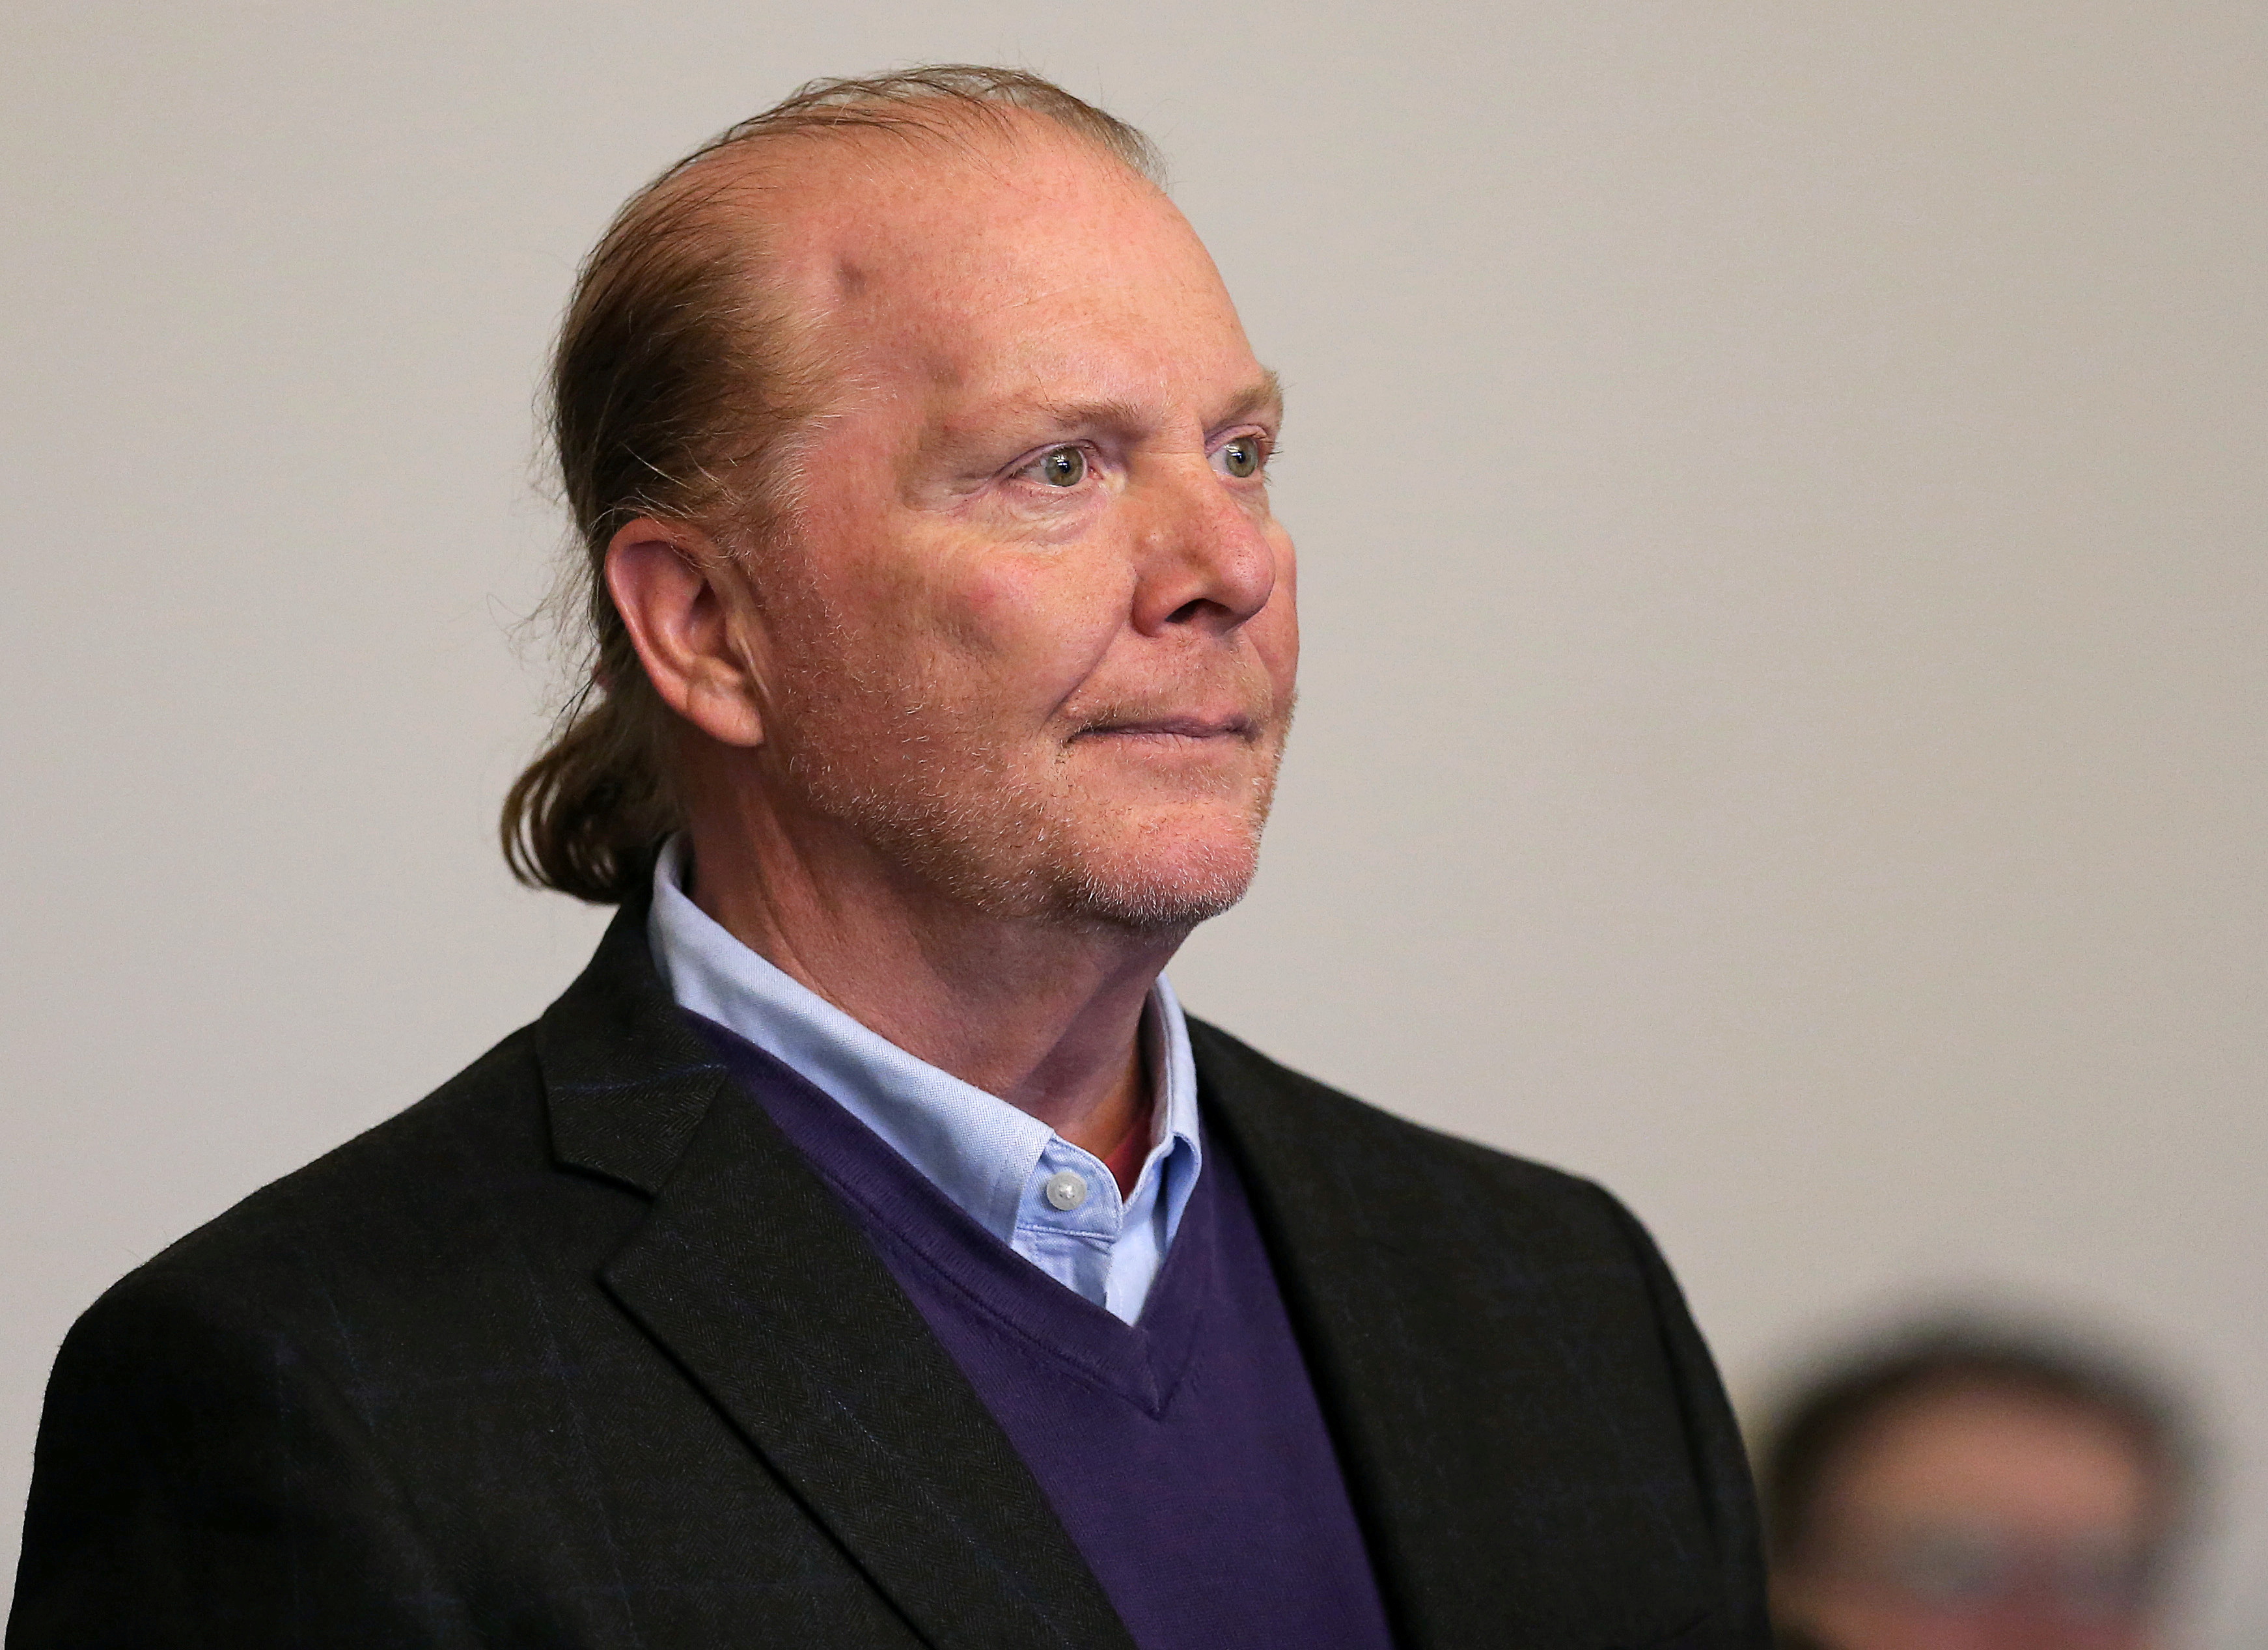 Celebrity chef Mario Batali, 58, is arraigned on a charge of indecent assault and battery at Boston Municpal Court in Boston